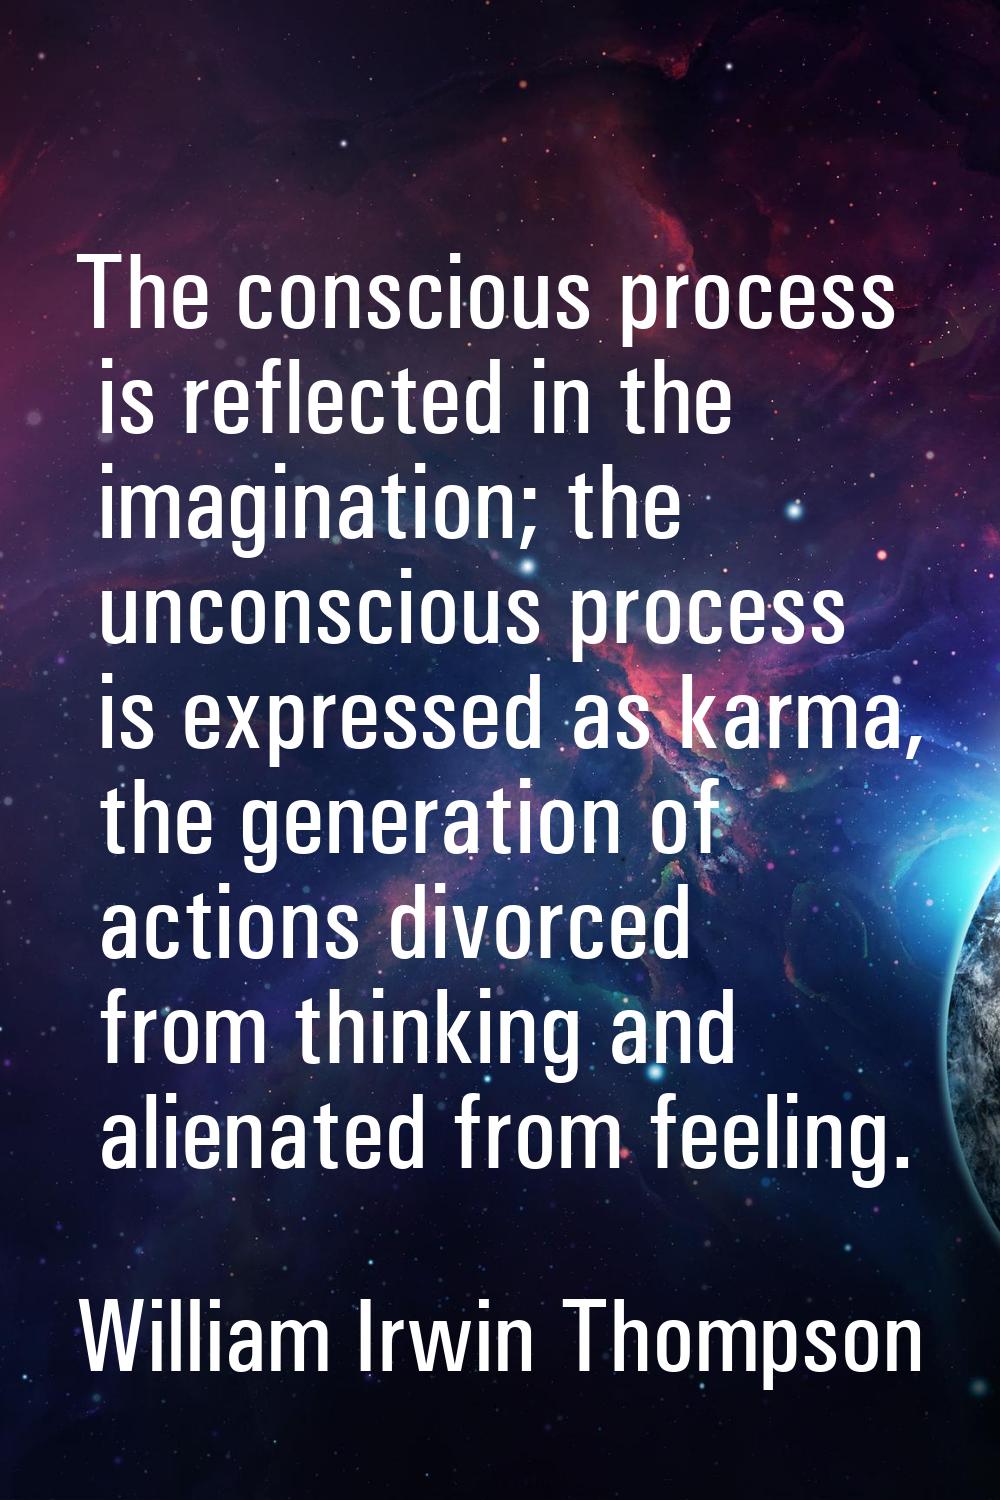 The conscious process is reflected in the imagination; the unconscious process is expressed as karm